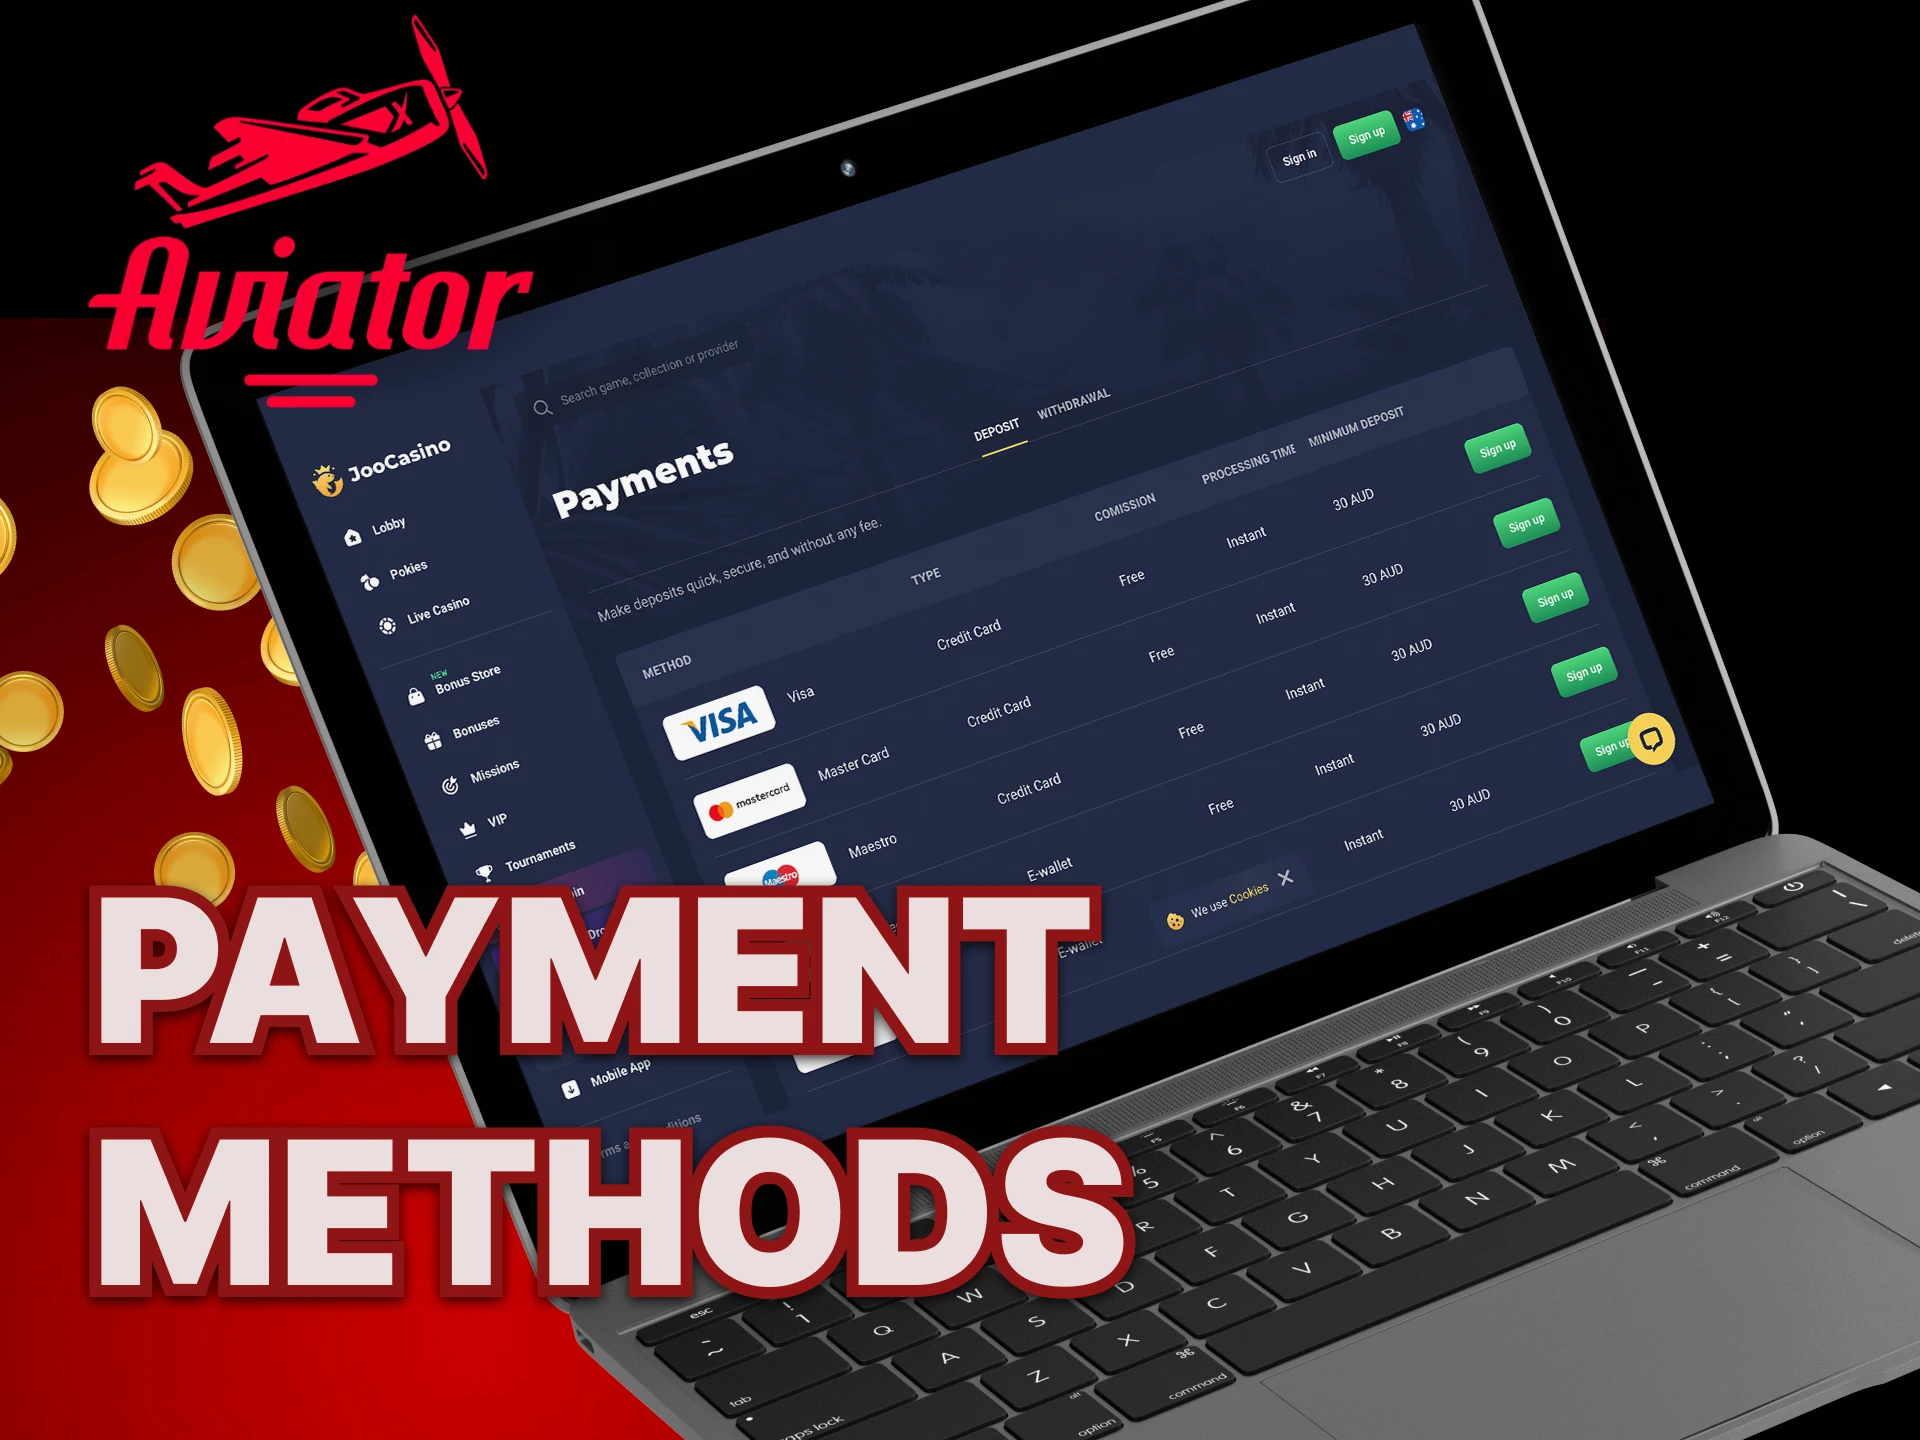 What are the payment methods for the Aviator game.